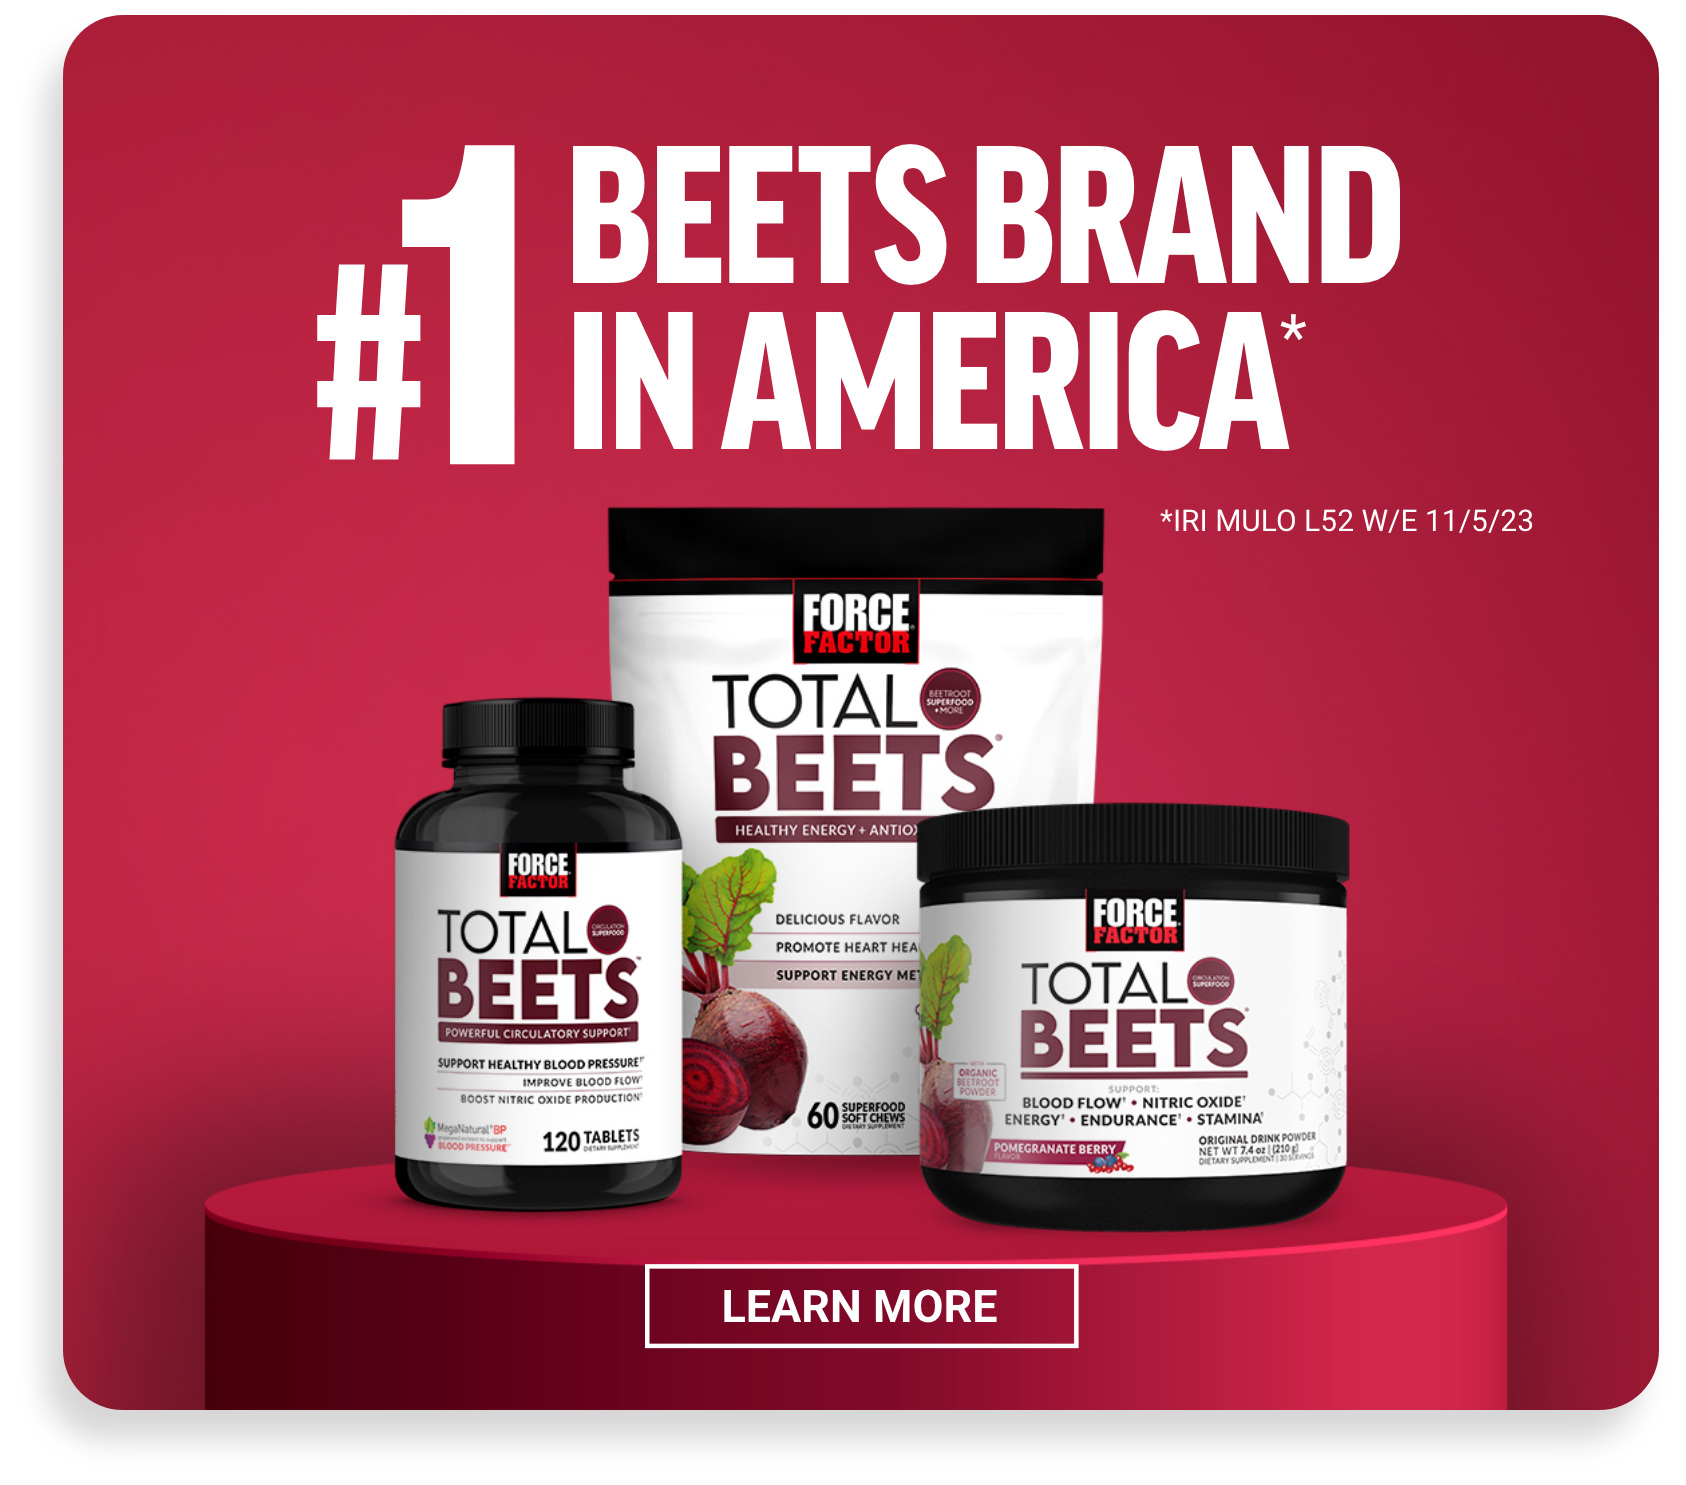 New! Total Beets - Learn More